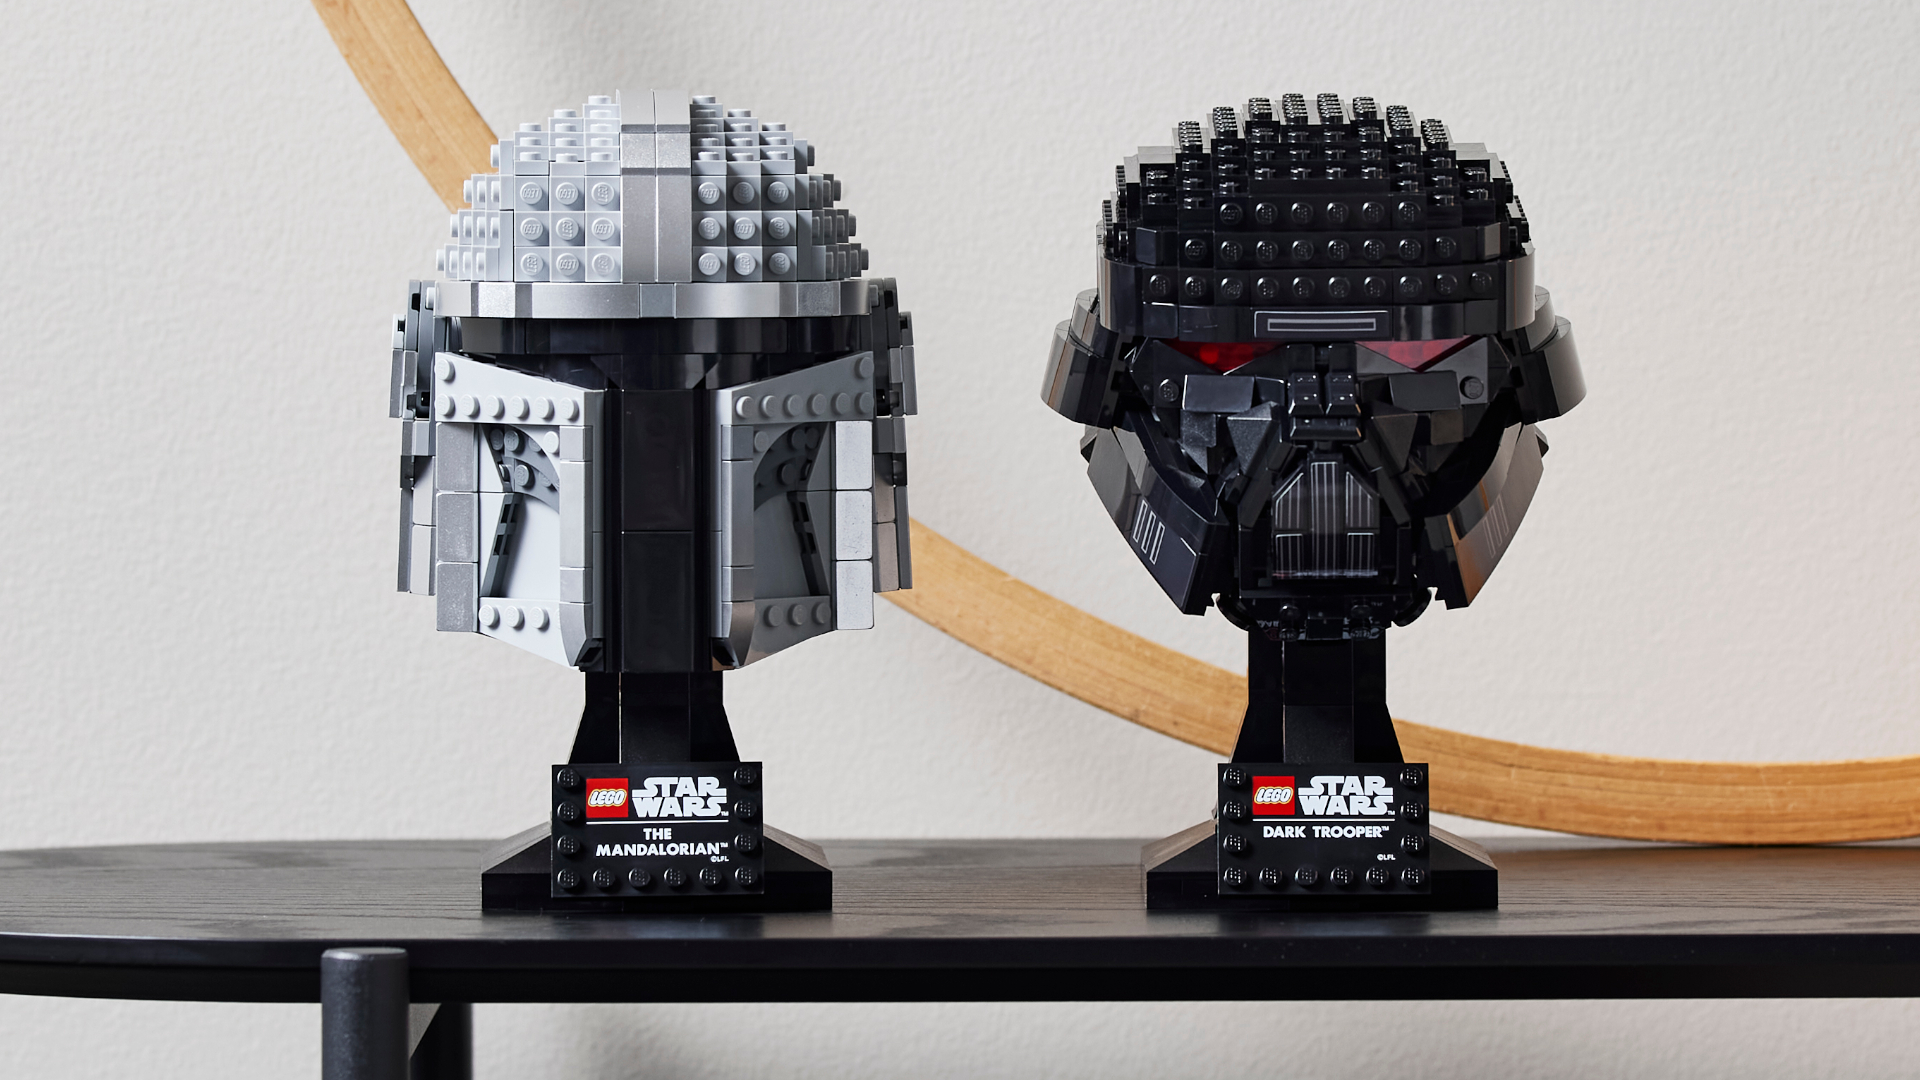 New Mandalorian Lego Star Wars Helmets are up for preorder, including